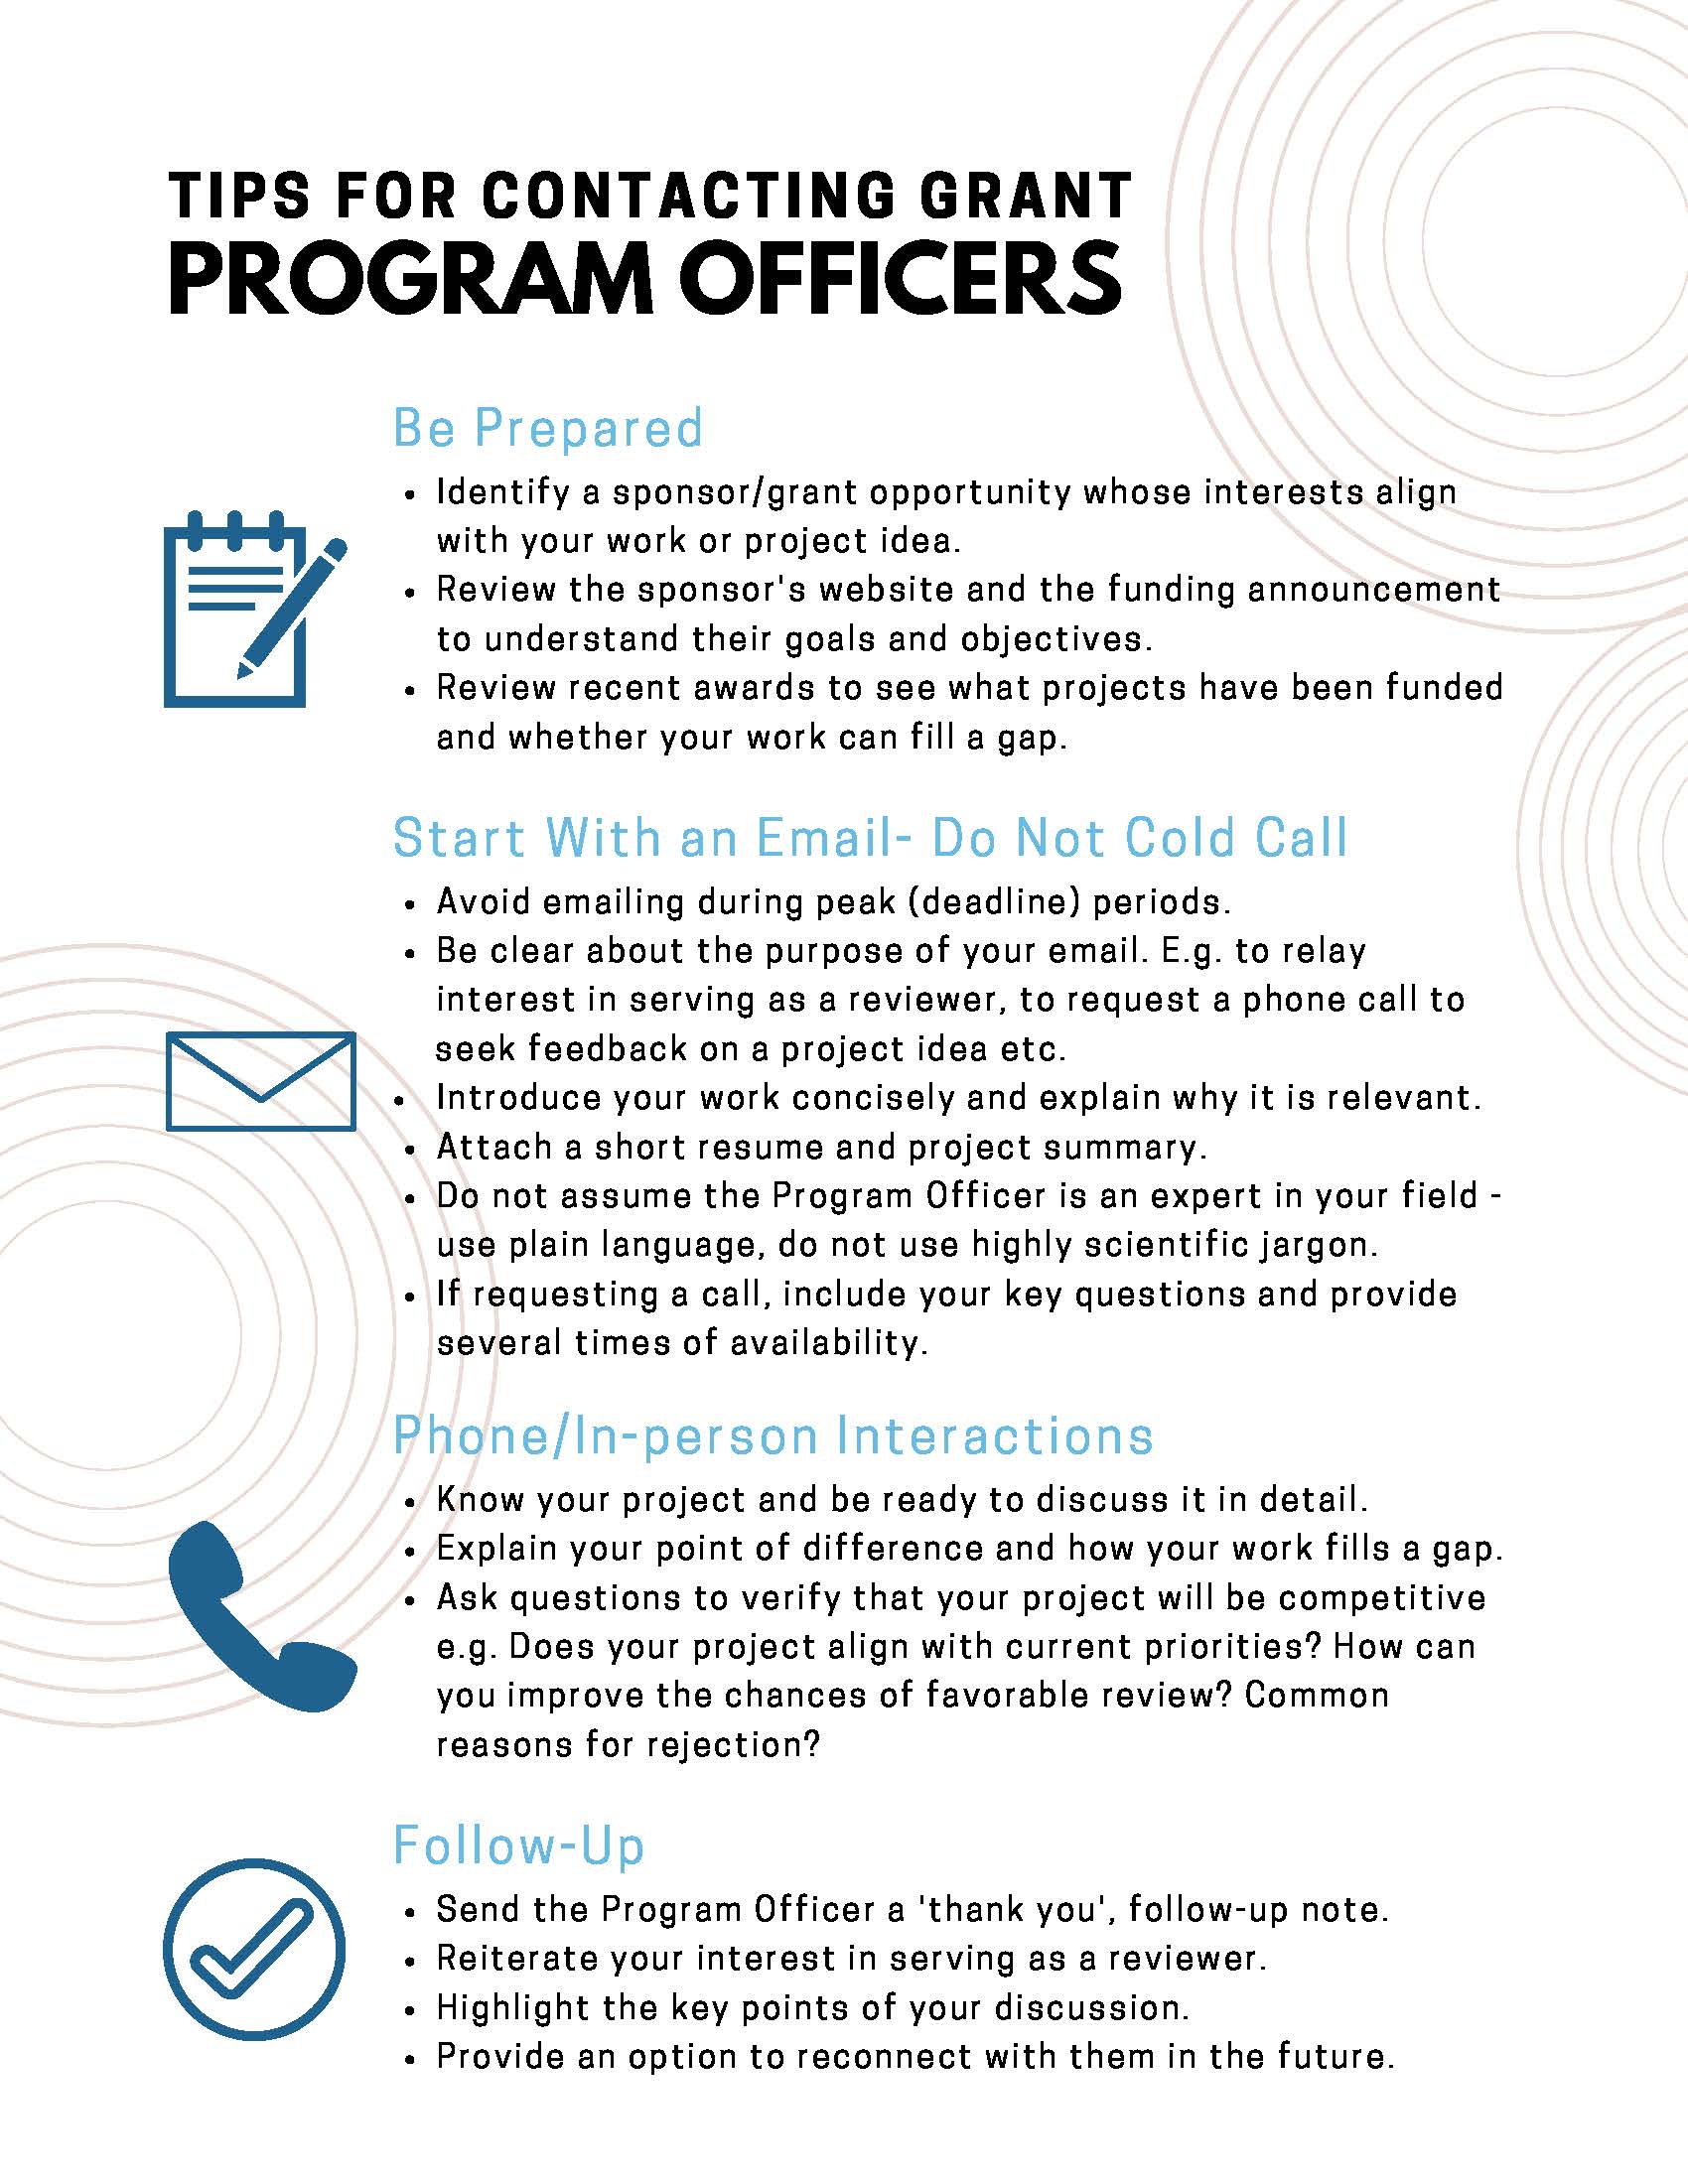 Program officer contact tips